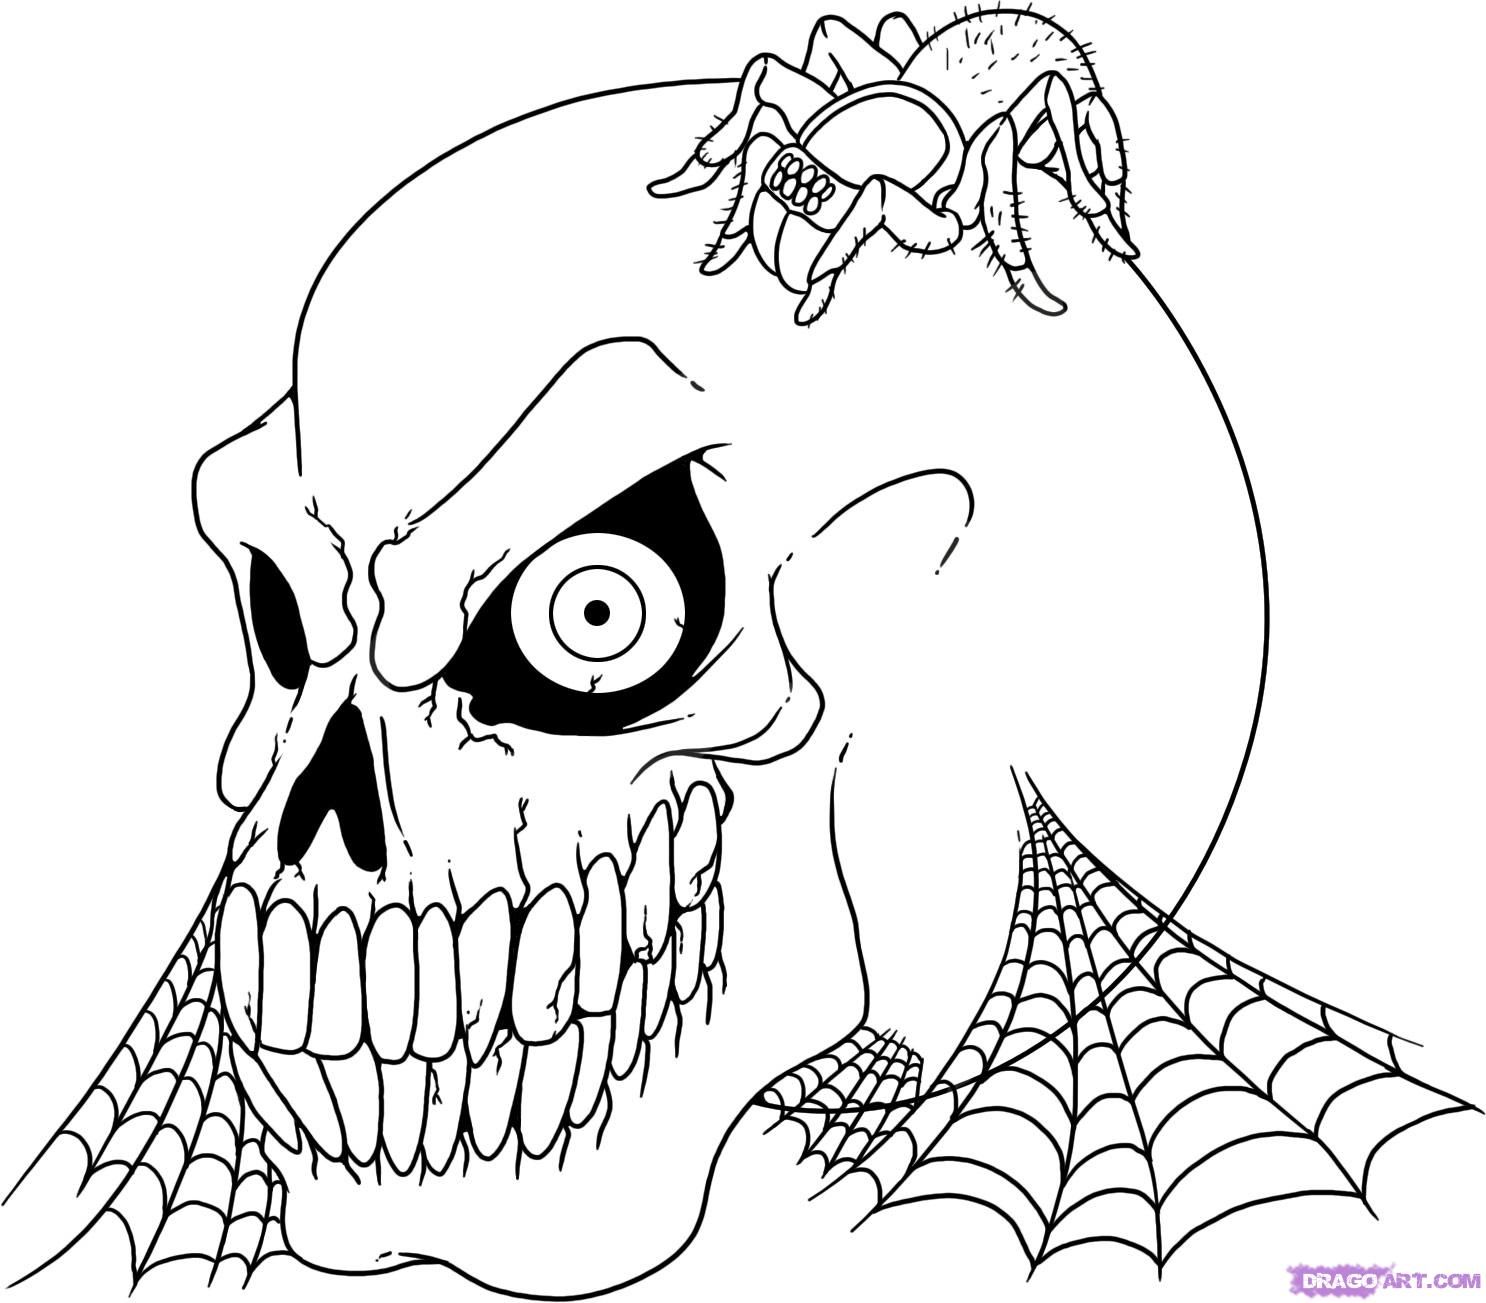 halloween coloring pages: Halloween Skeleton Coloring Pages, Free ...